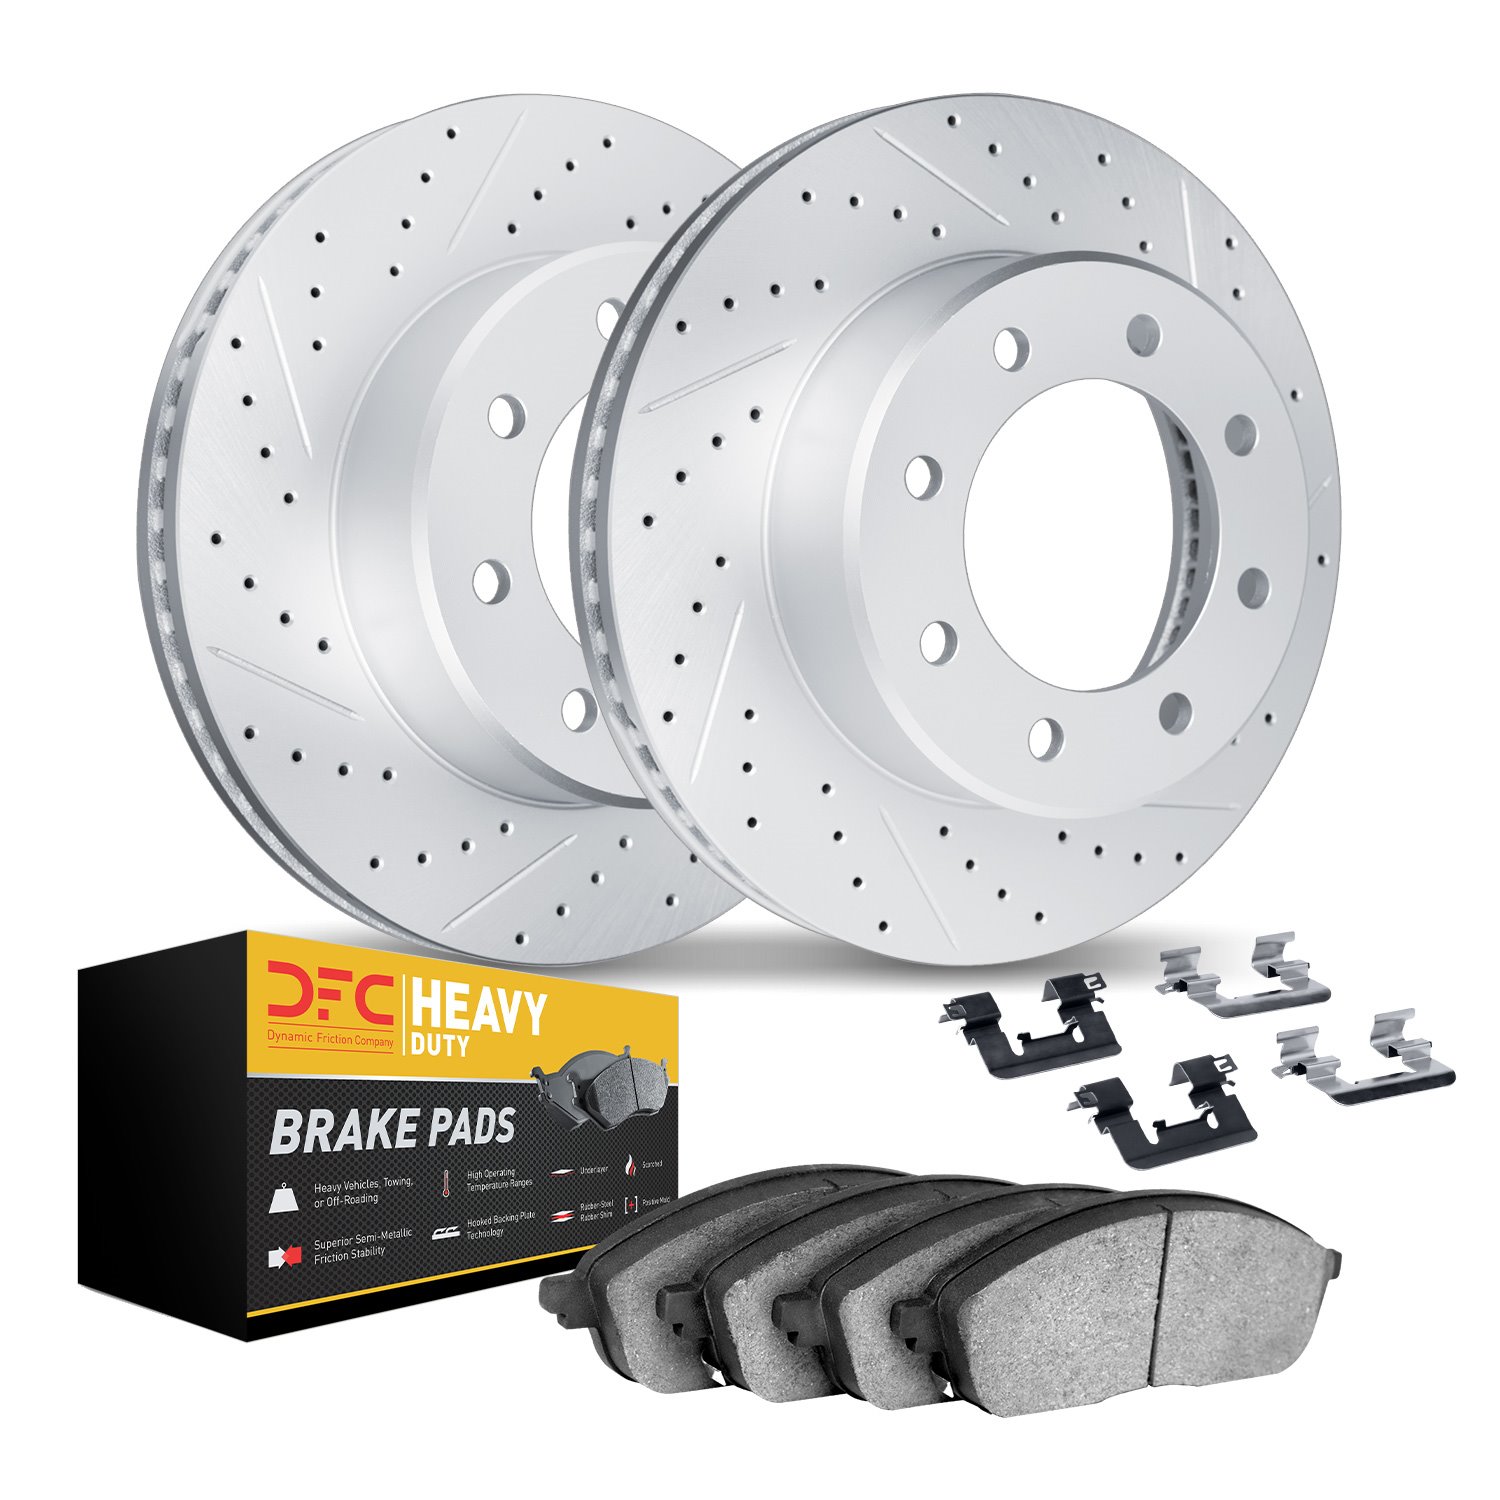 2212-99080 Geoperformance Drilled/Slotted Rotors w/Heavy-Duty Pads Kit & Hardware, 1995-2007 Ford/Lincoln/Mercury/Mazda, Positio